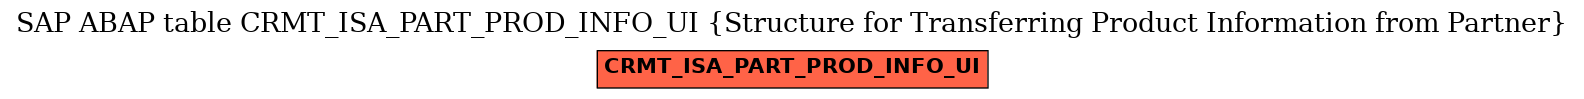 E-R Diagram for table CRMT_ISA_PART_PROD_INFO_UI (Structure for Transferring Product Information from Partner)